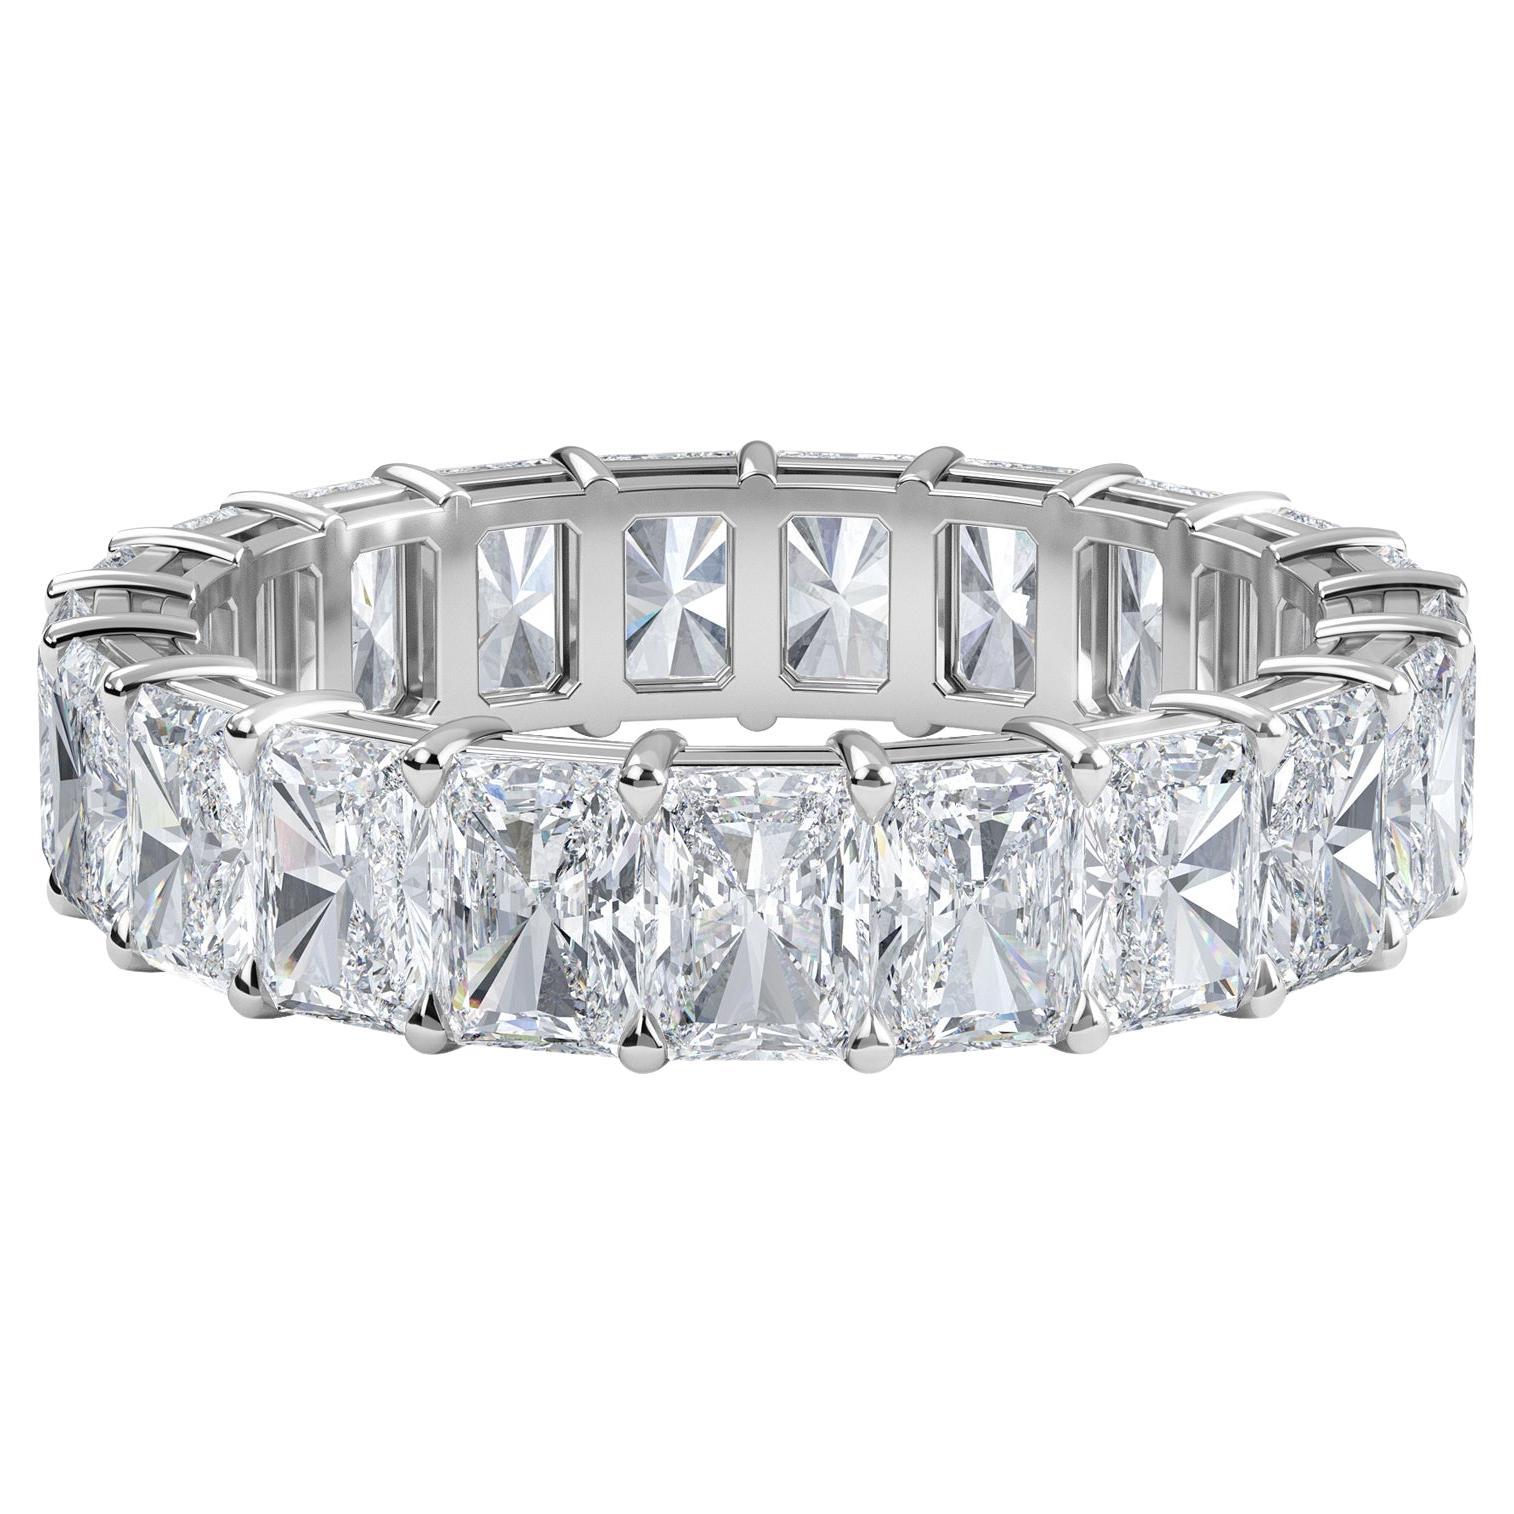 Radiant Diamond Eternity Band, 5.58 Total Carat Weight